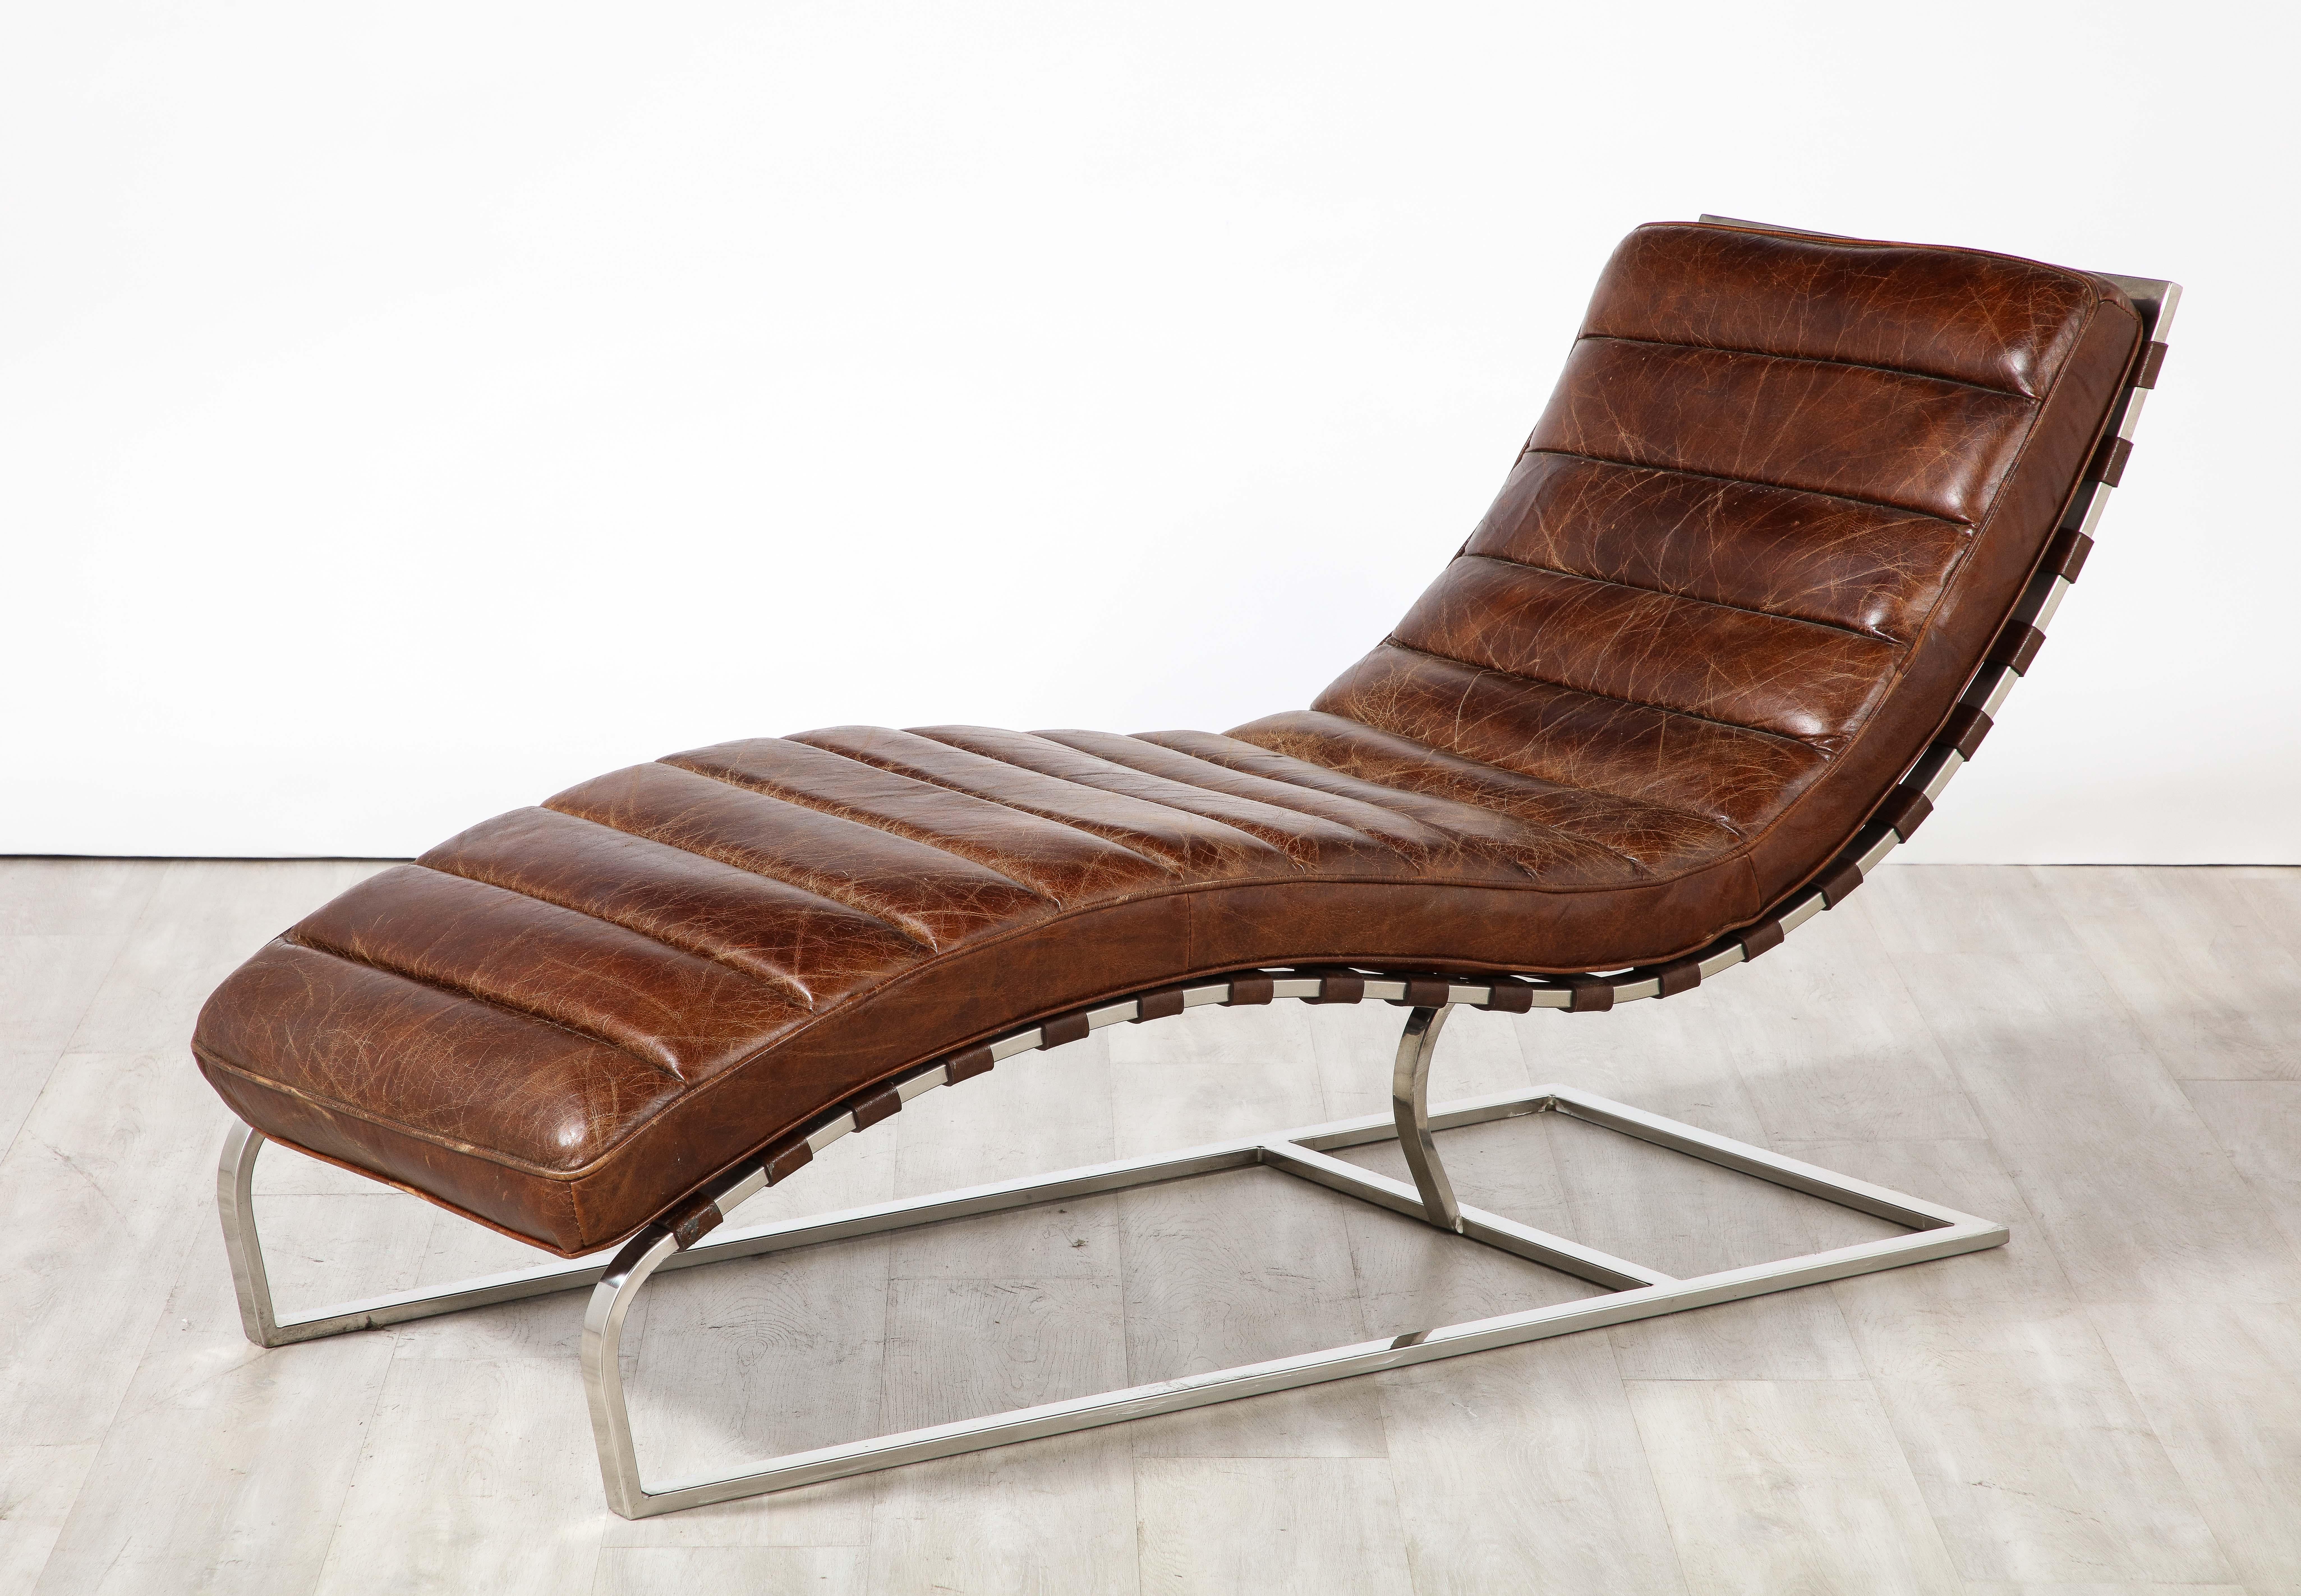 A handsome chocolate brown channeled Italian leather chaise longue from the 1970's. The sloping contoured wavy curved frame sits in harmony with the angular chrome support. The warm and rich chocolate brown leather contrasts beautifully with the